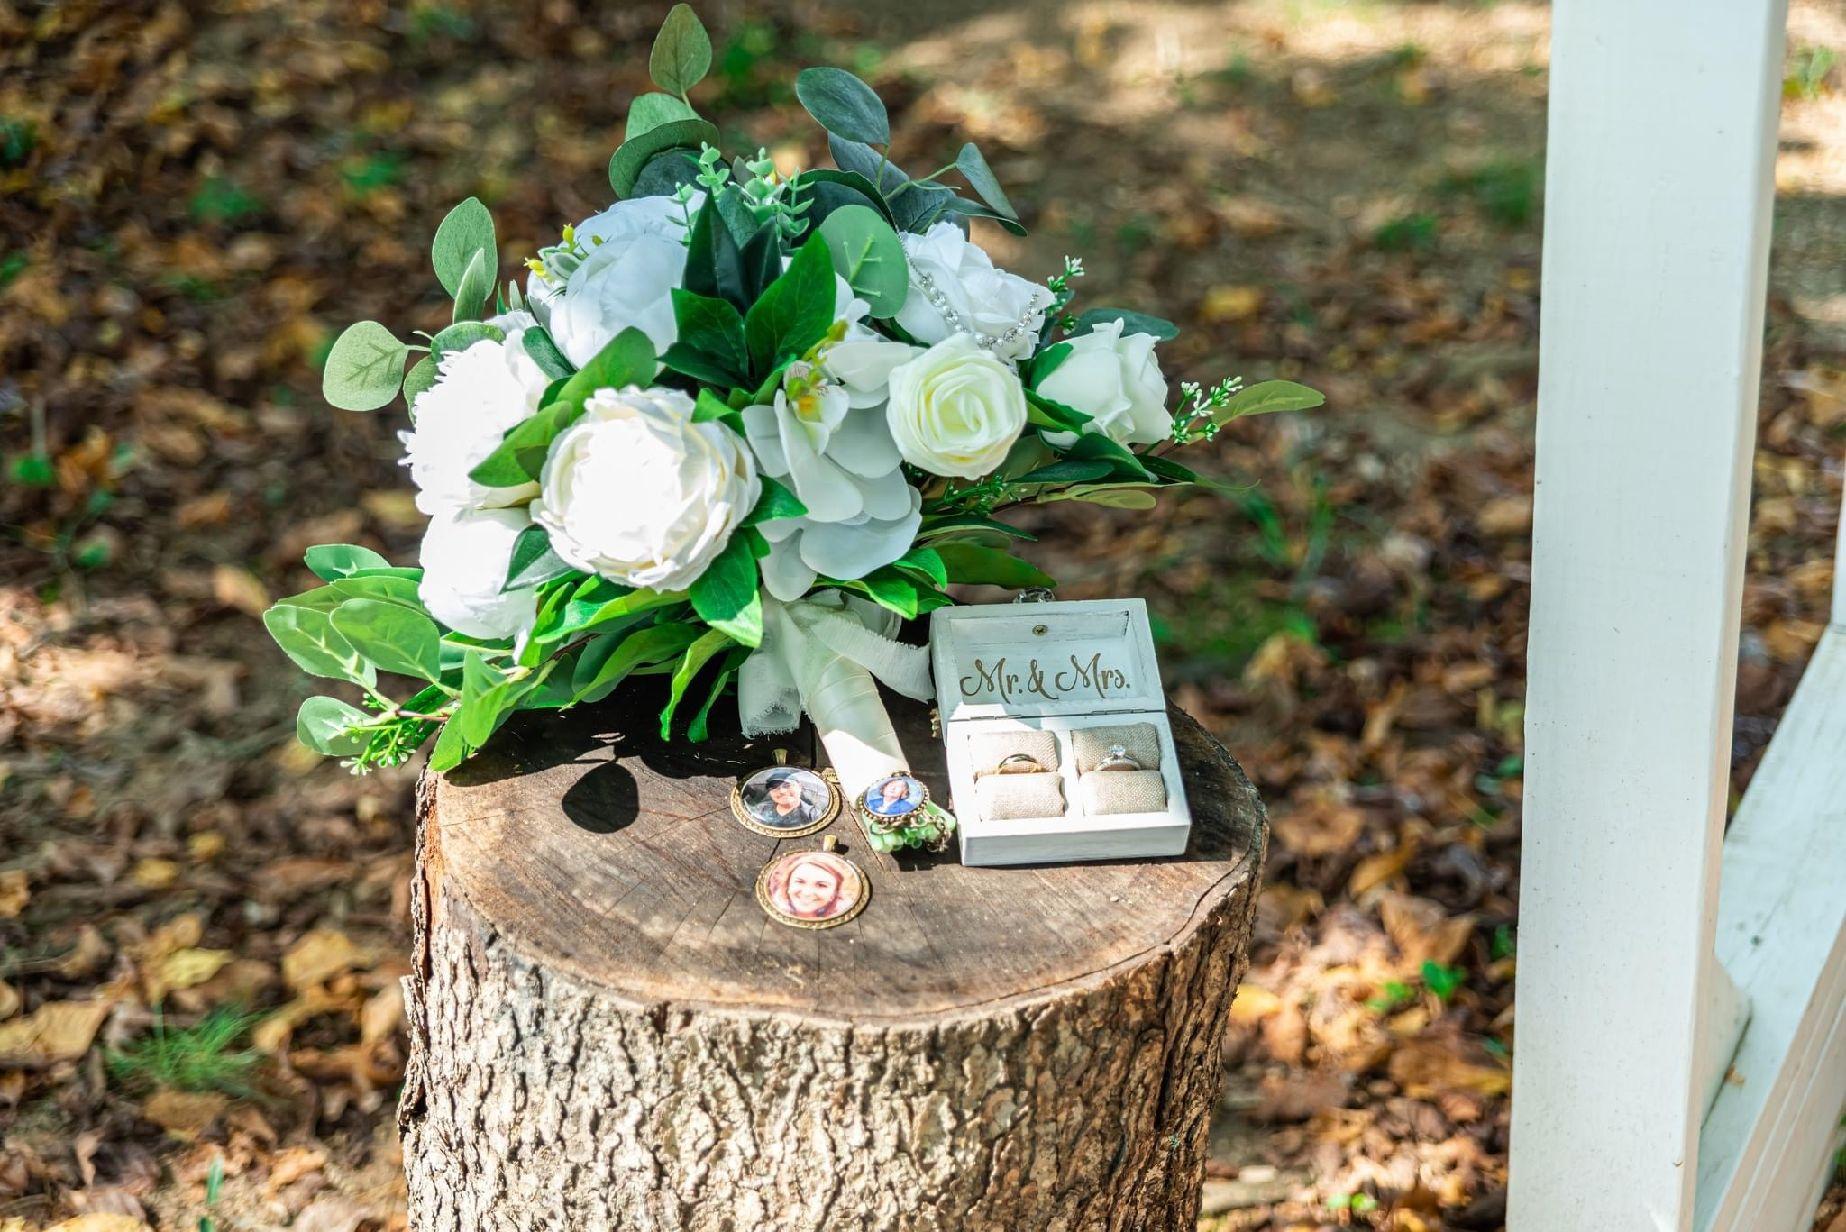 The bouquet of white roses and bright greenery are perched on a log with the couple's wedding bands and photo ornaments